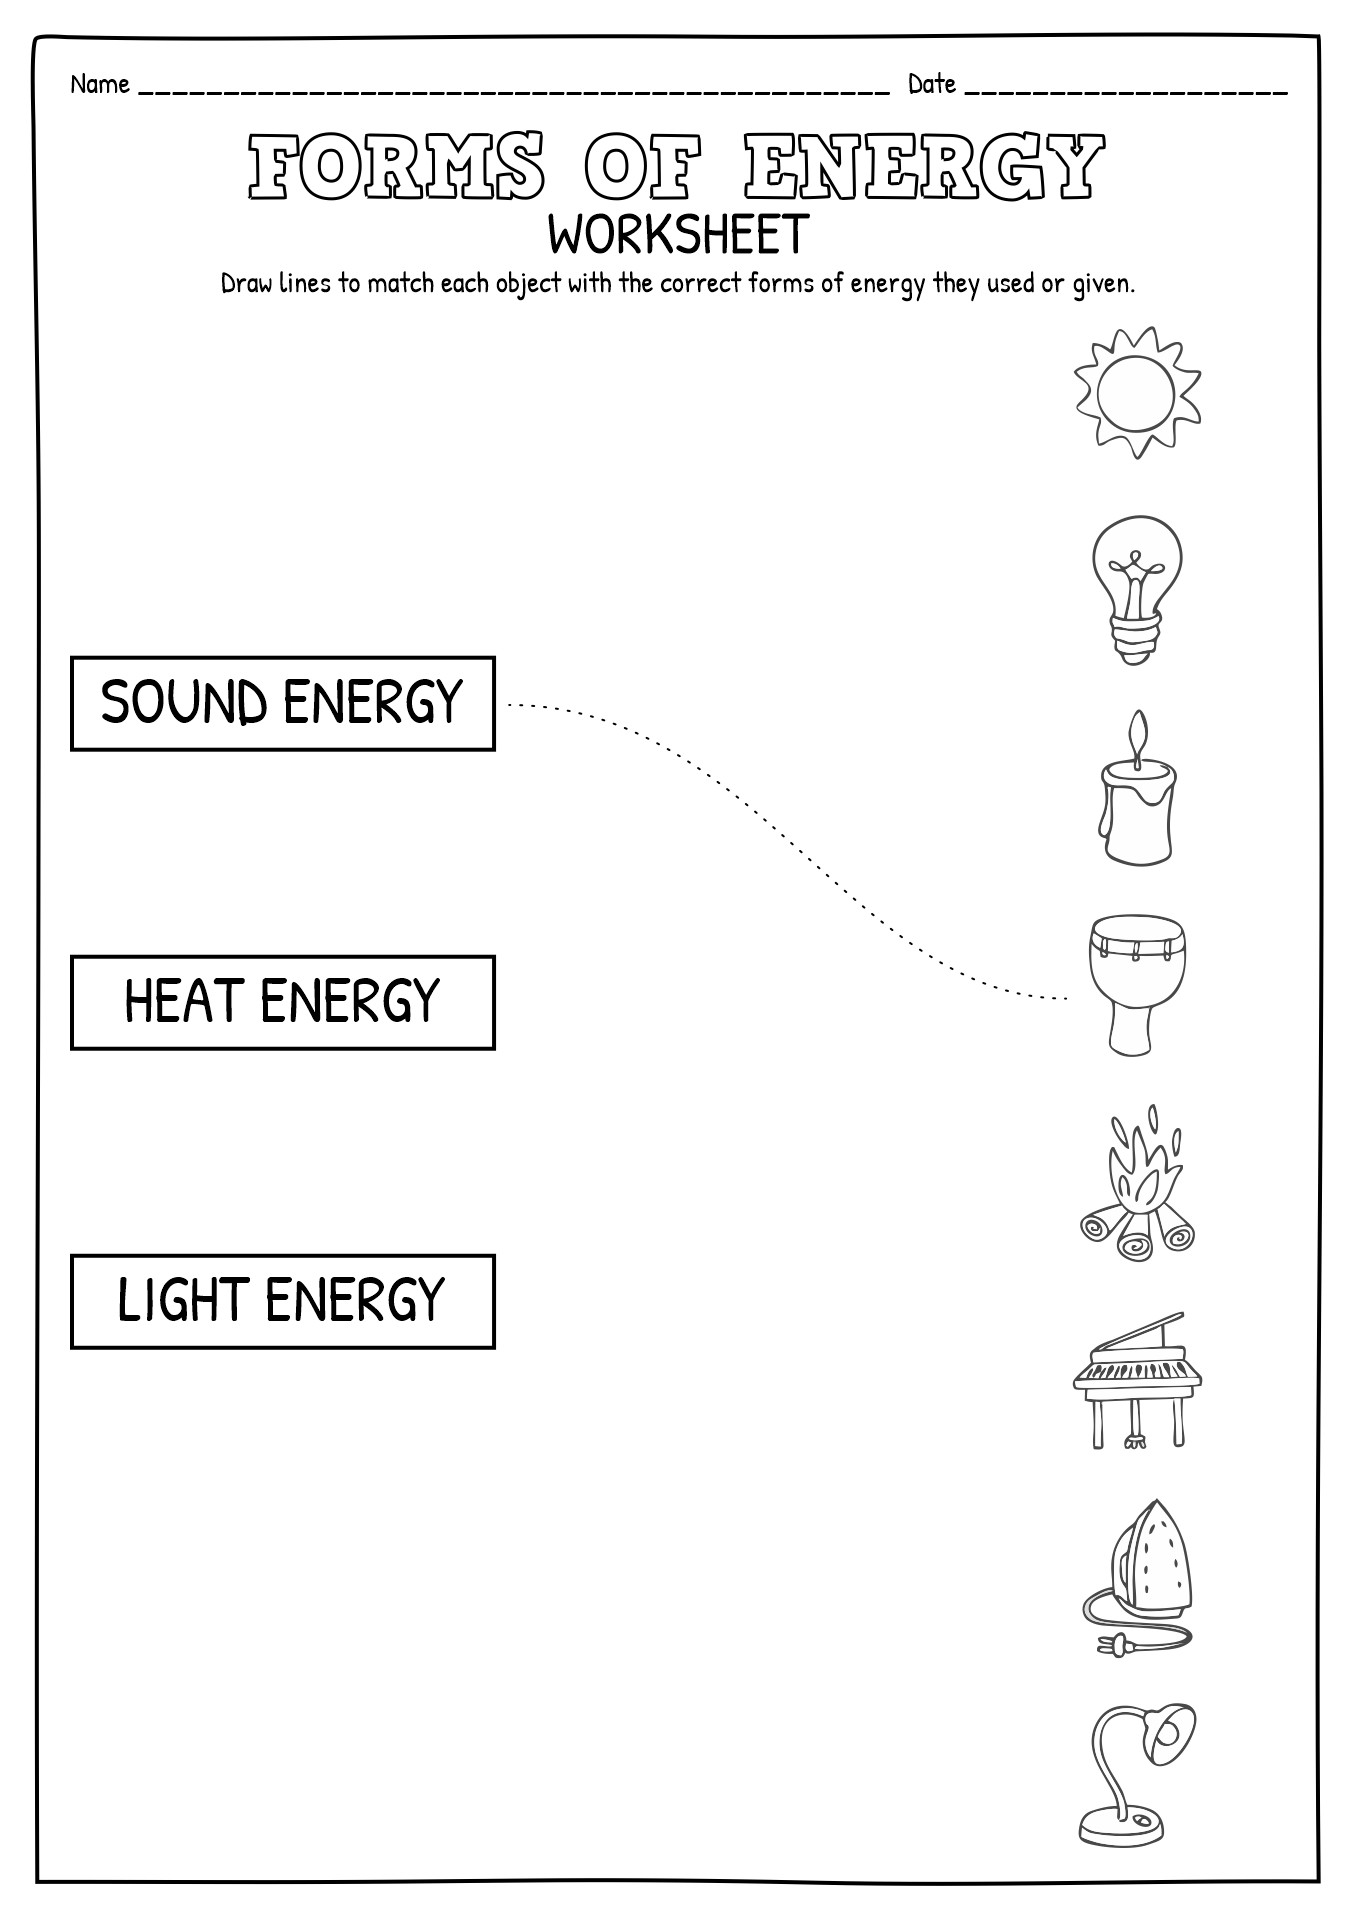 Forms of Energy Worksheets 2nd Grade Image